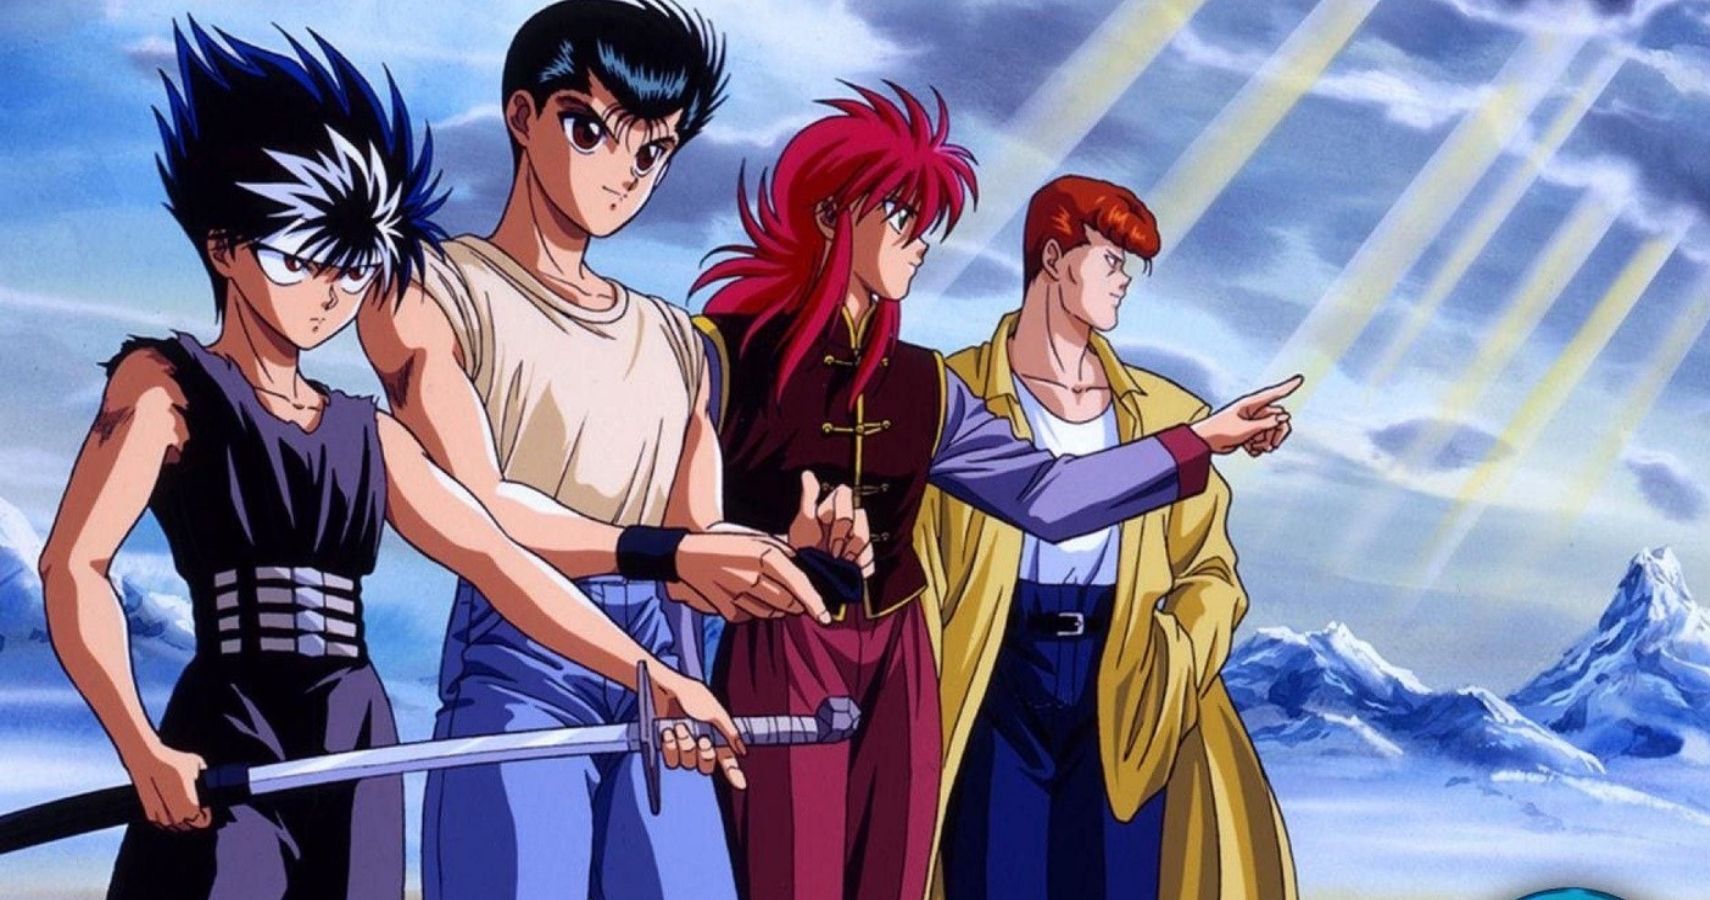 WriterFreak001 — Possible Unpopular Opinion about YYH